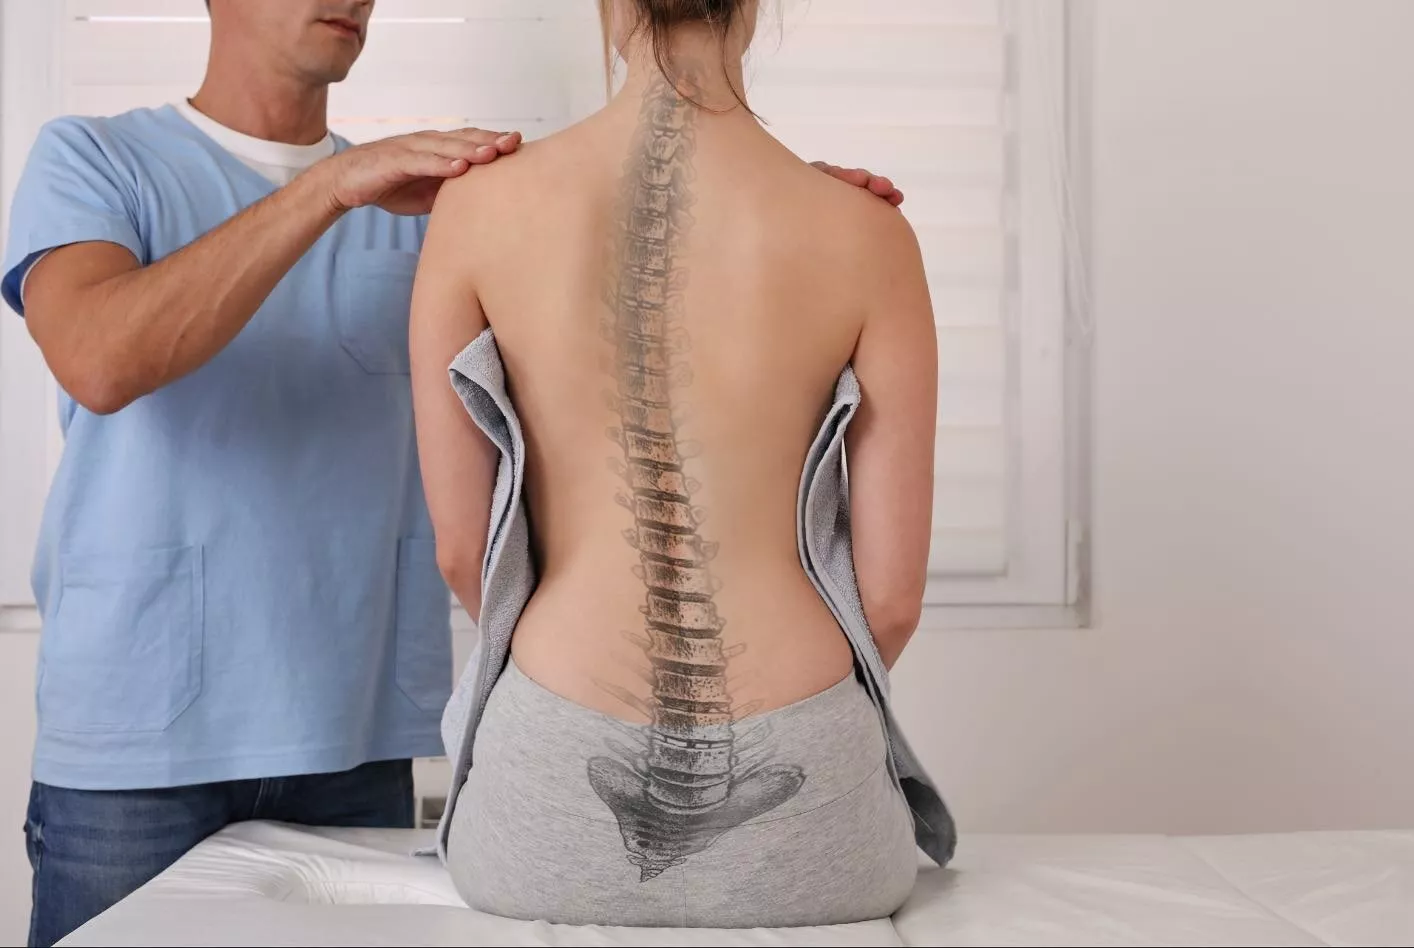 What is Scoliosis Spinal Curvature and How Is It Treated?